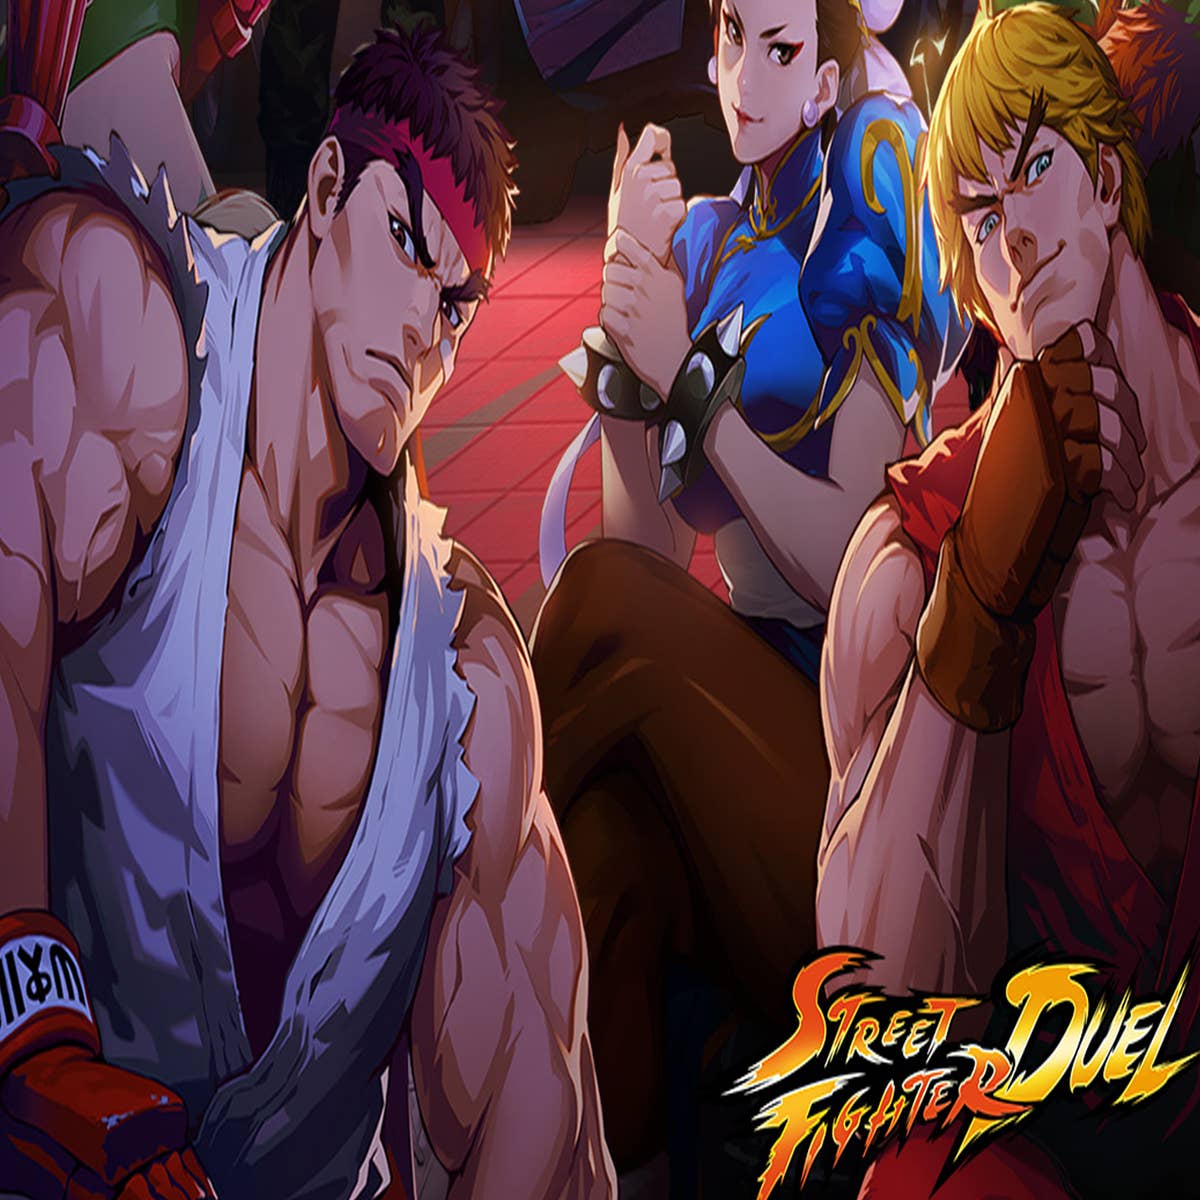 street fighters